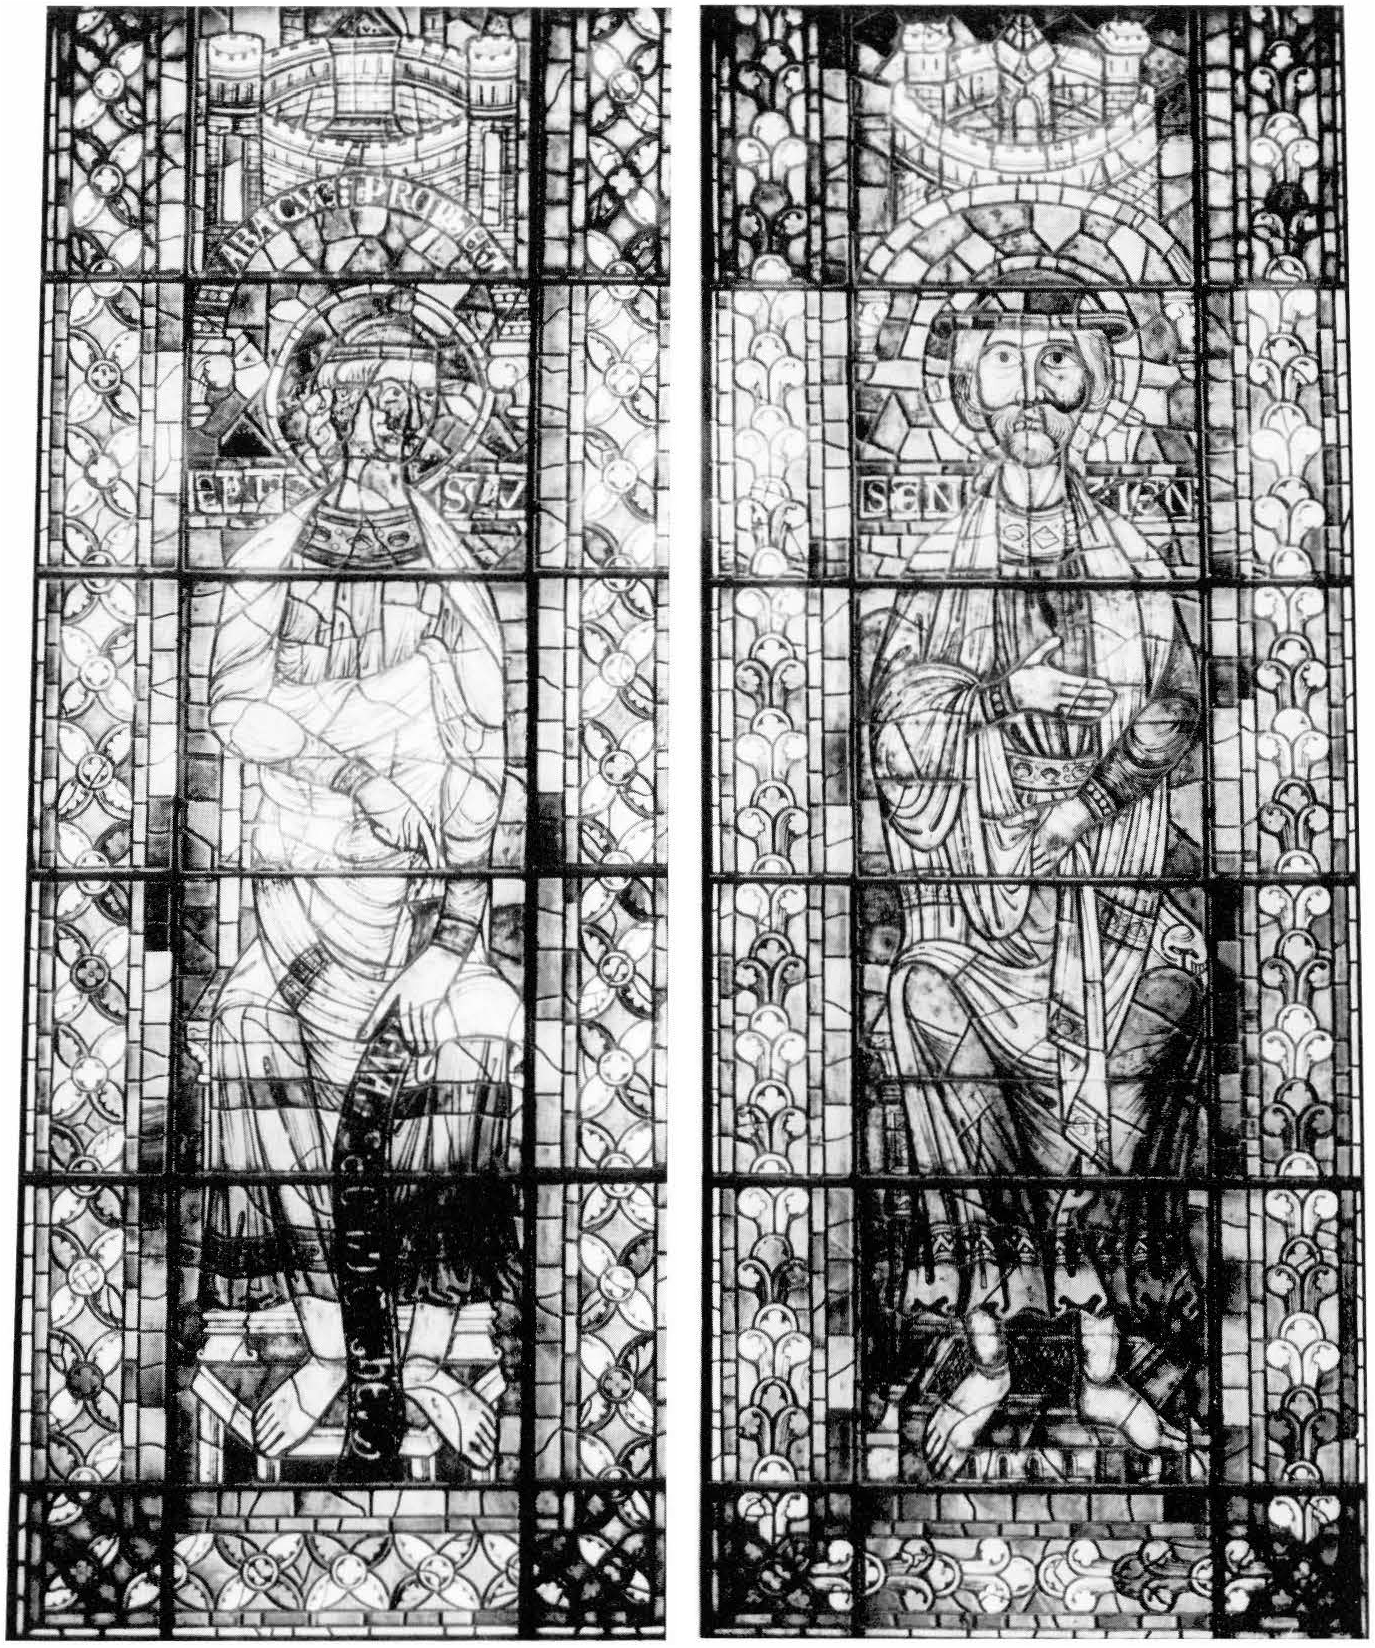 Seated Figures Under Canopies with Ornamental Borders